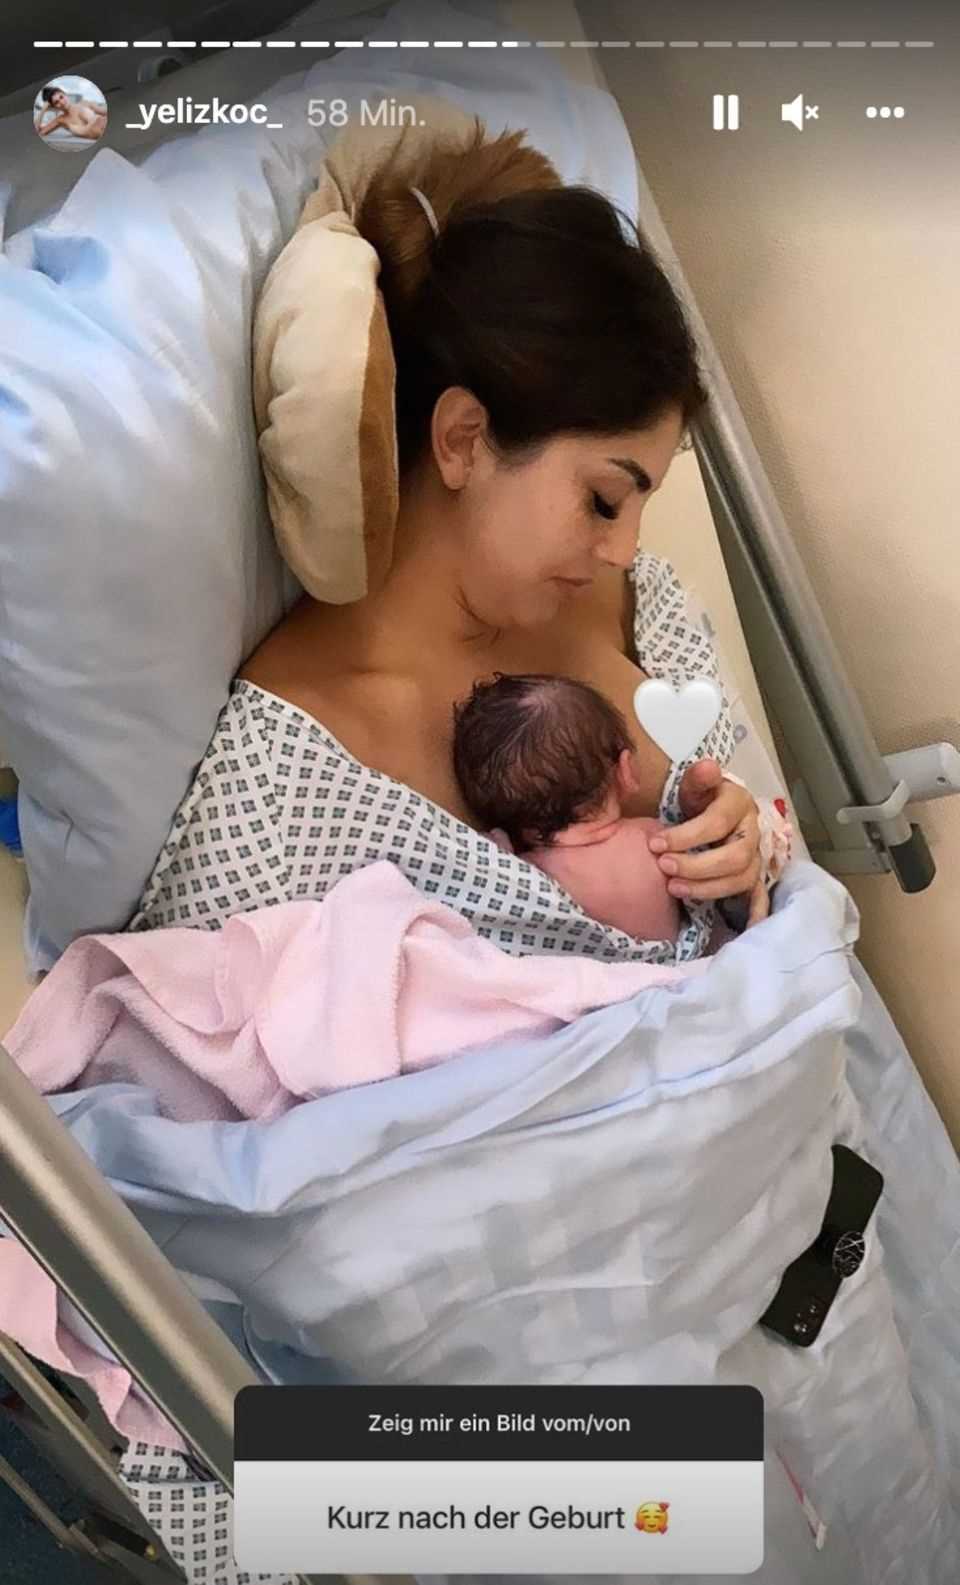 Yeliz Koc shortly after the birth of her daughter